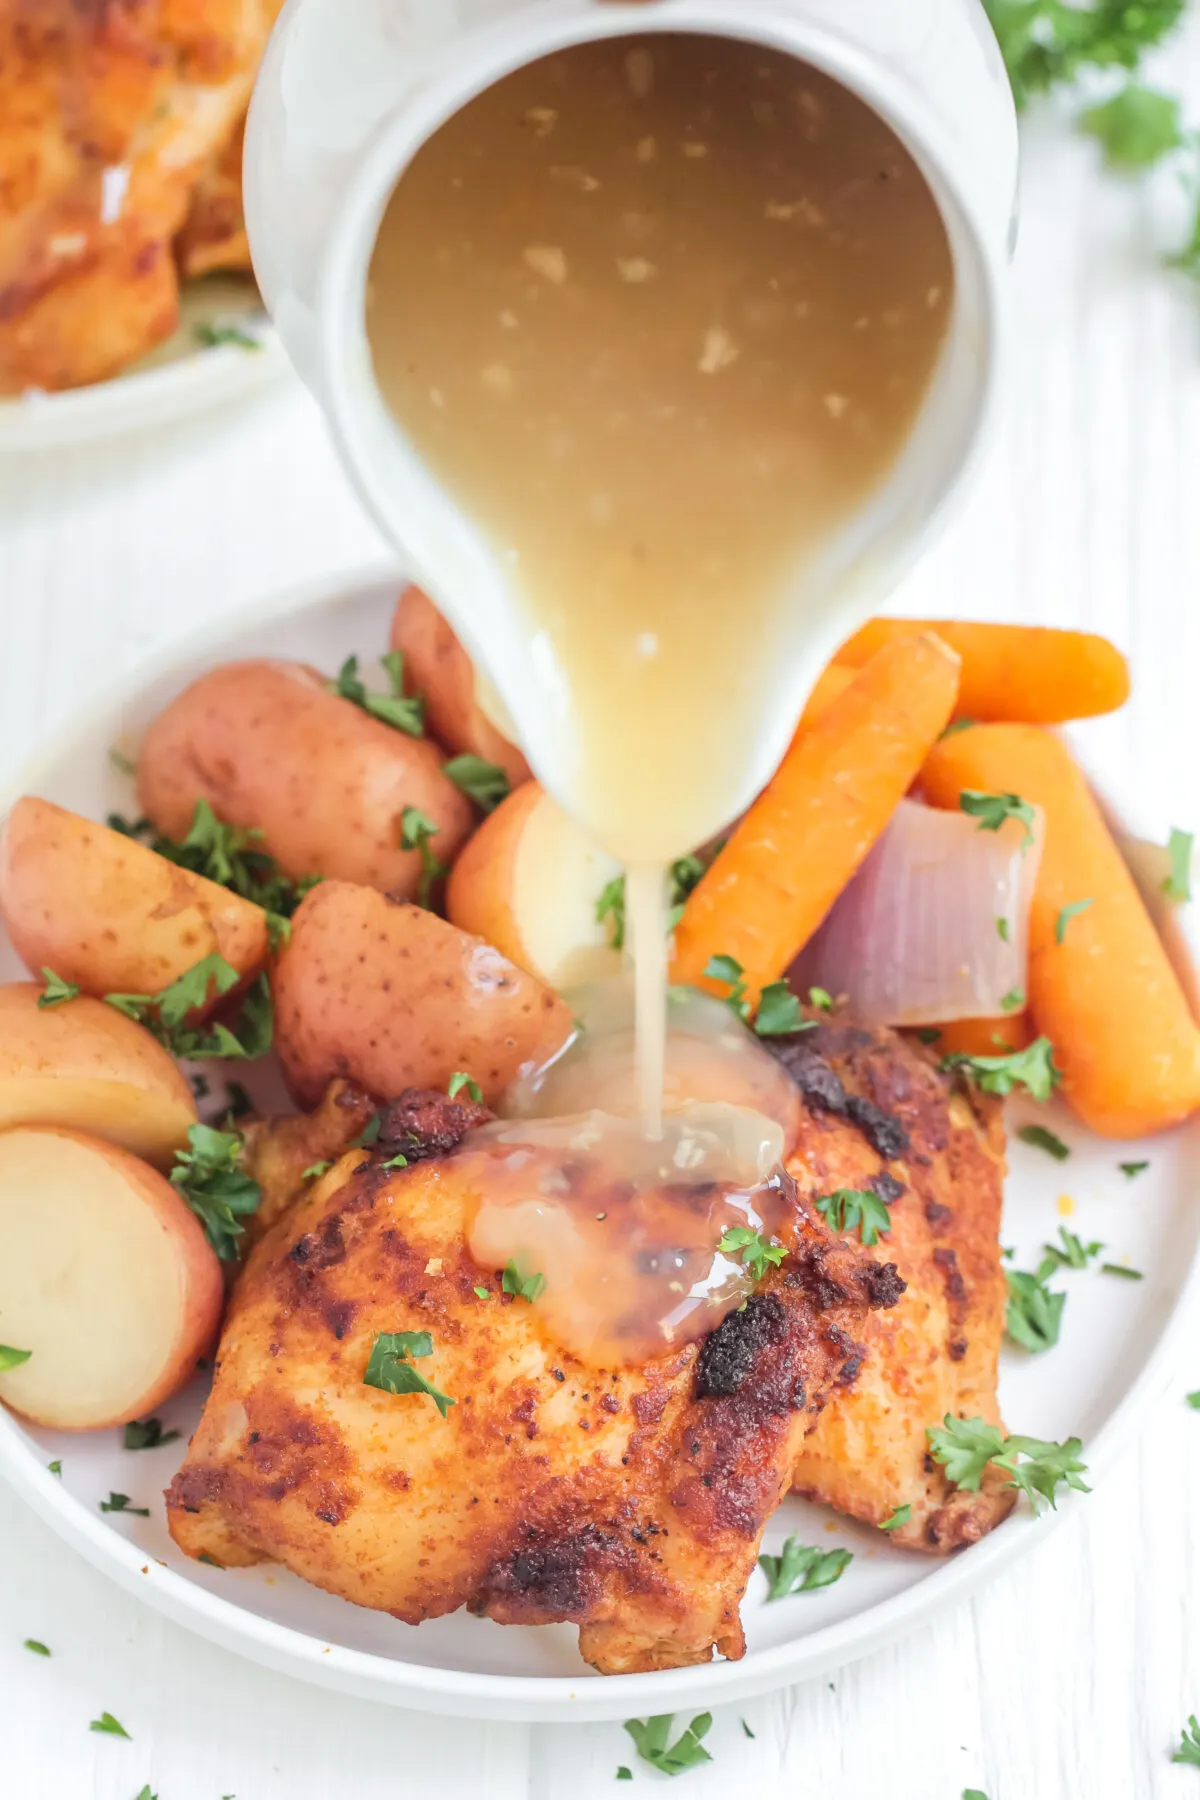 This easy slow cooker chicken thighs and potatoes recipe is perfect for a busy family. With carrots, it's a crock pot meal that's complete!